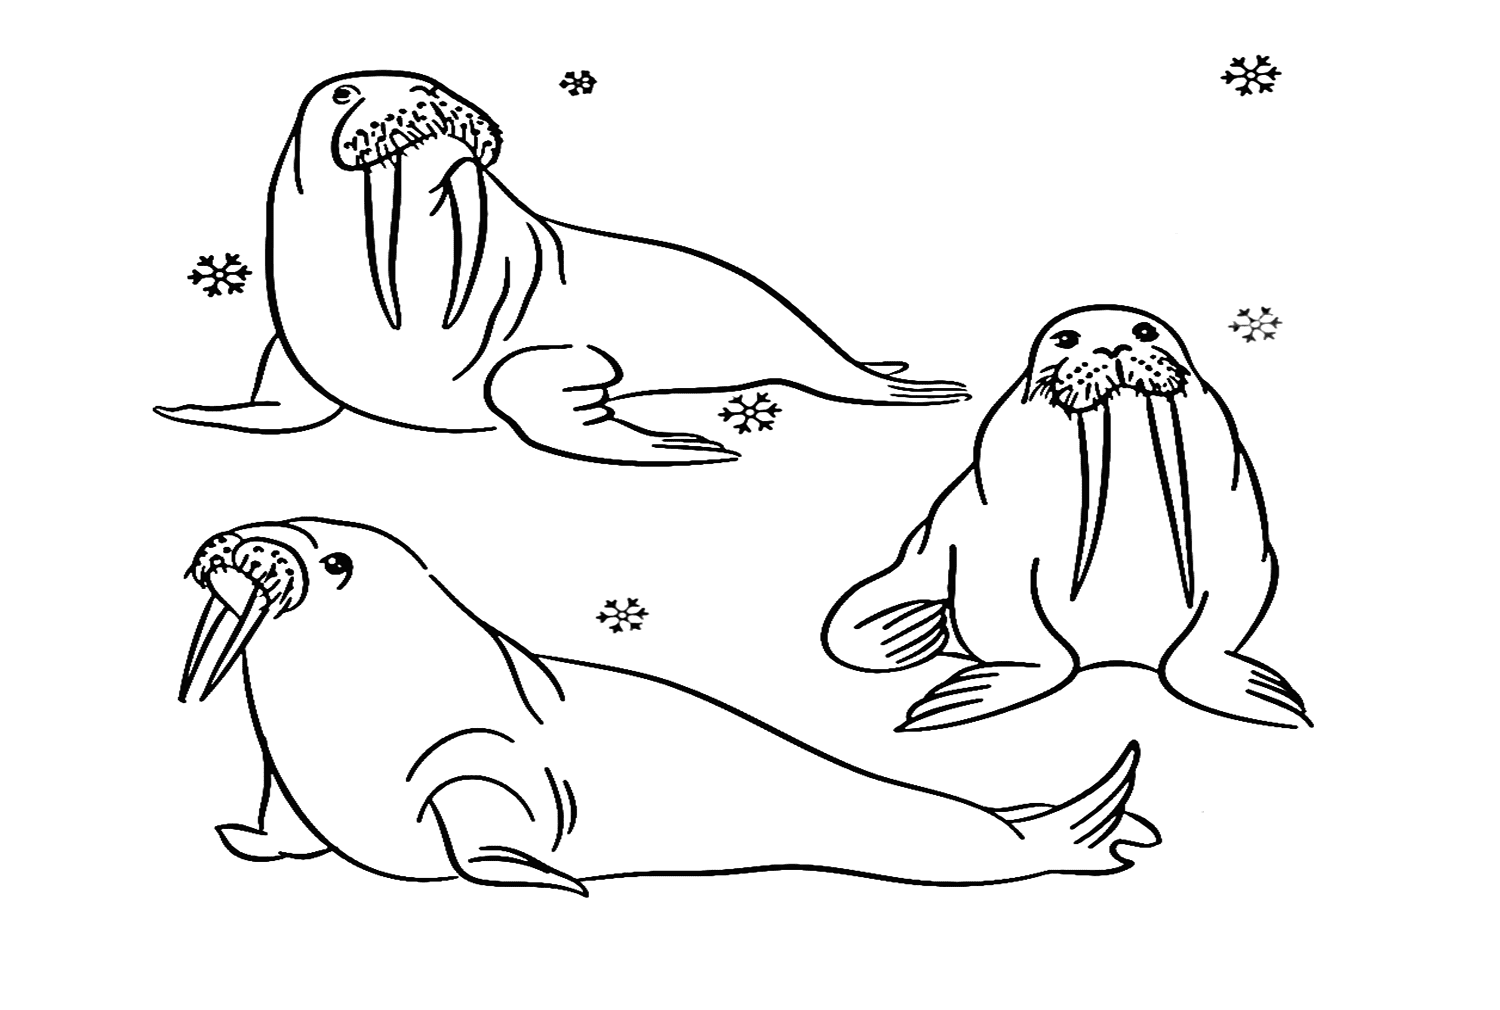 Walrus In Different Poses from Walrus